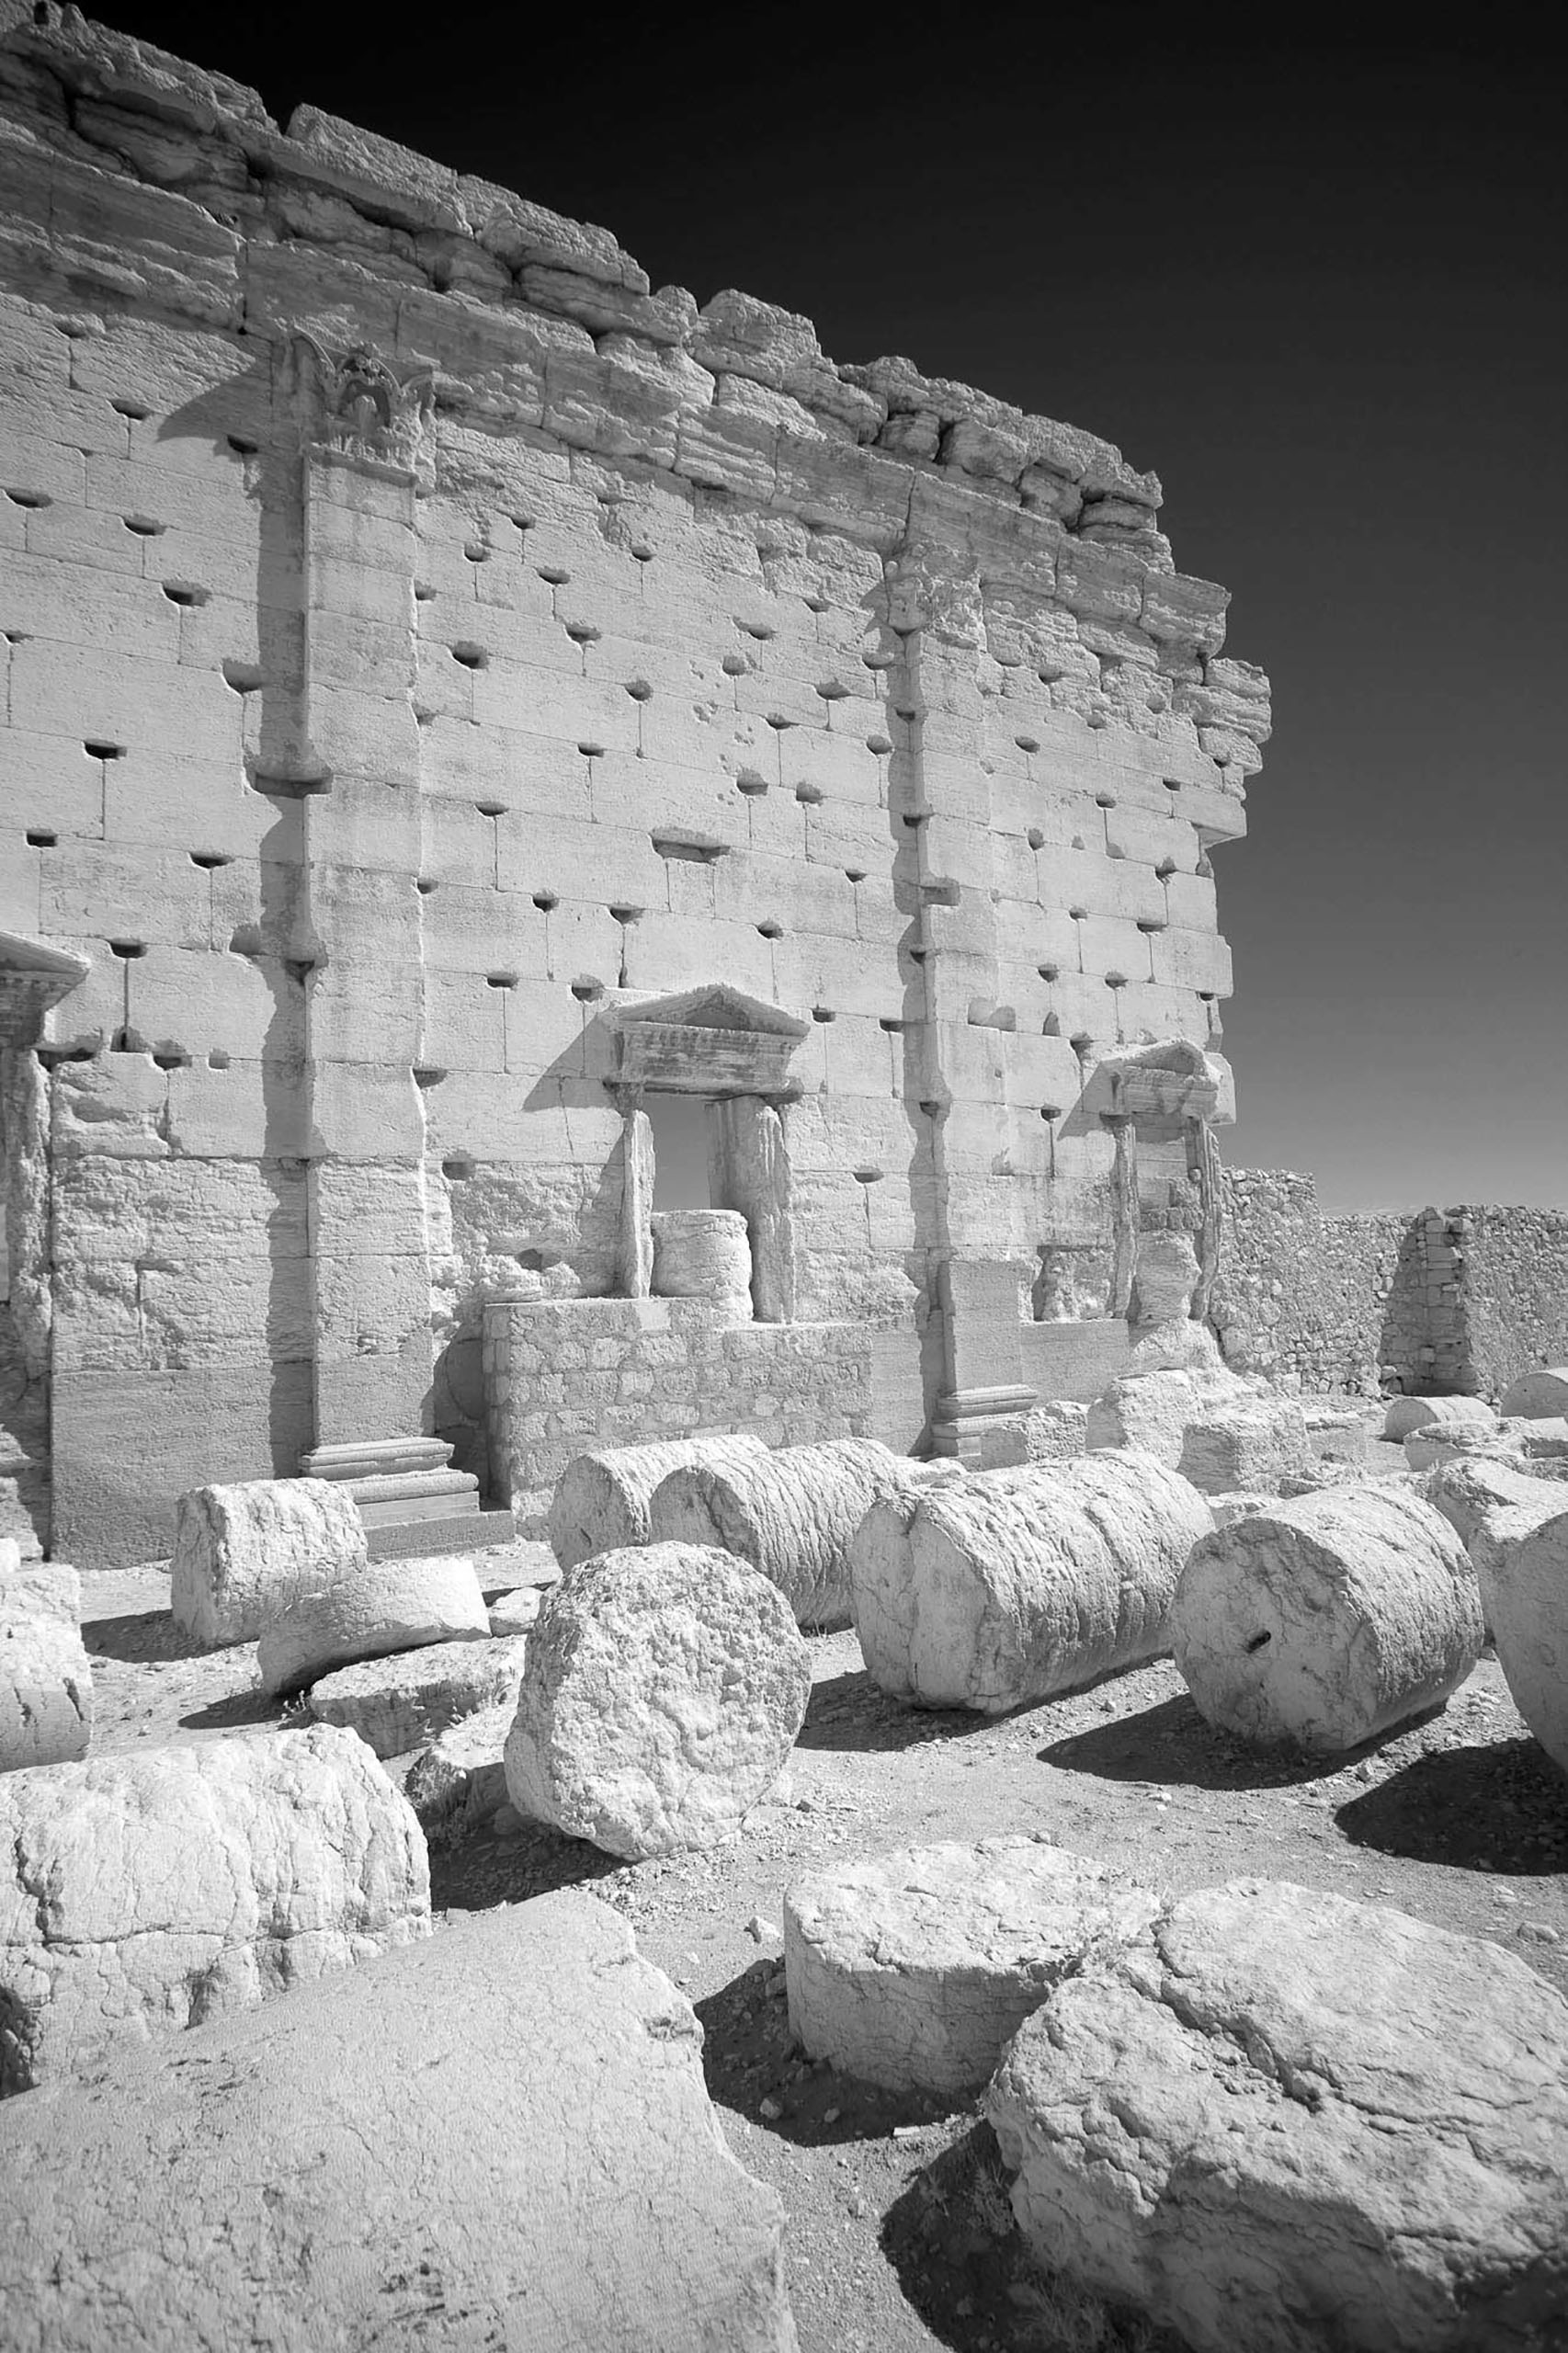 The Temple of Bel ruins were considered among the best preserved at Palmyra.